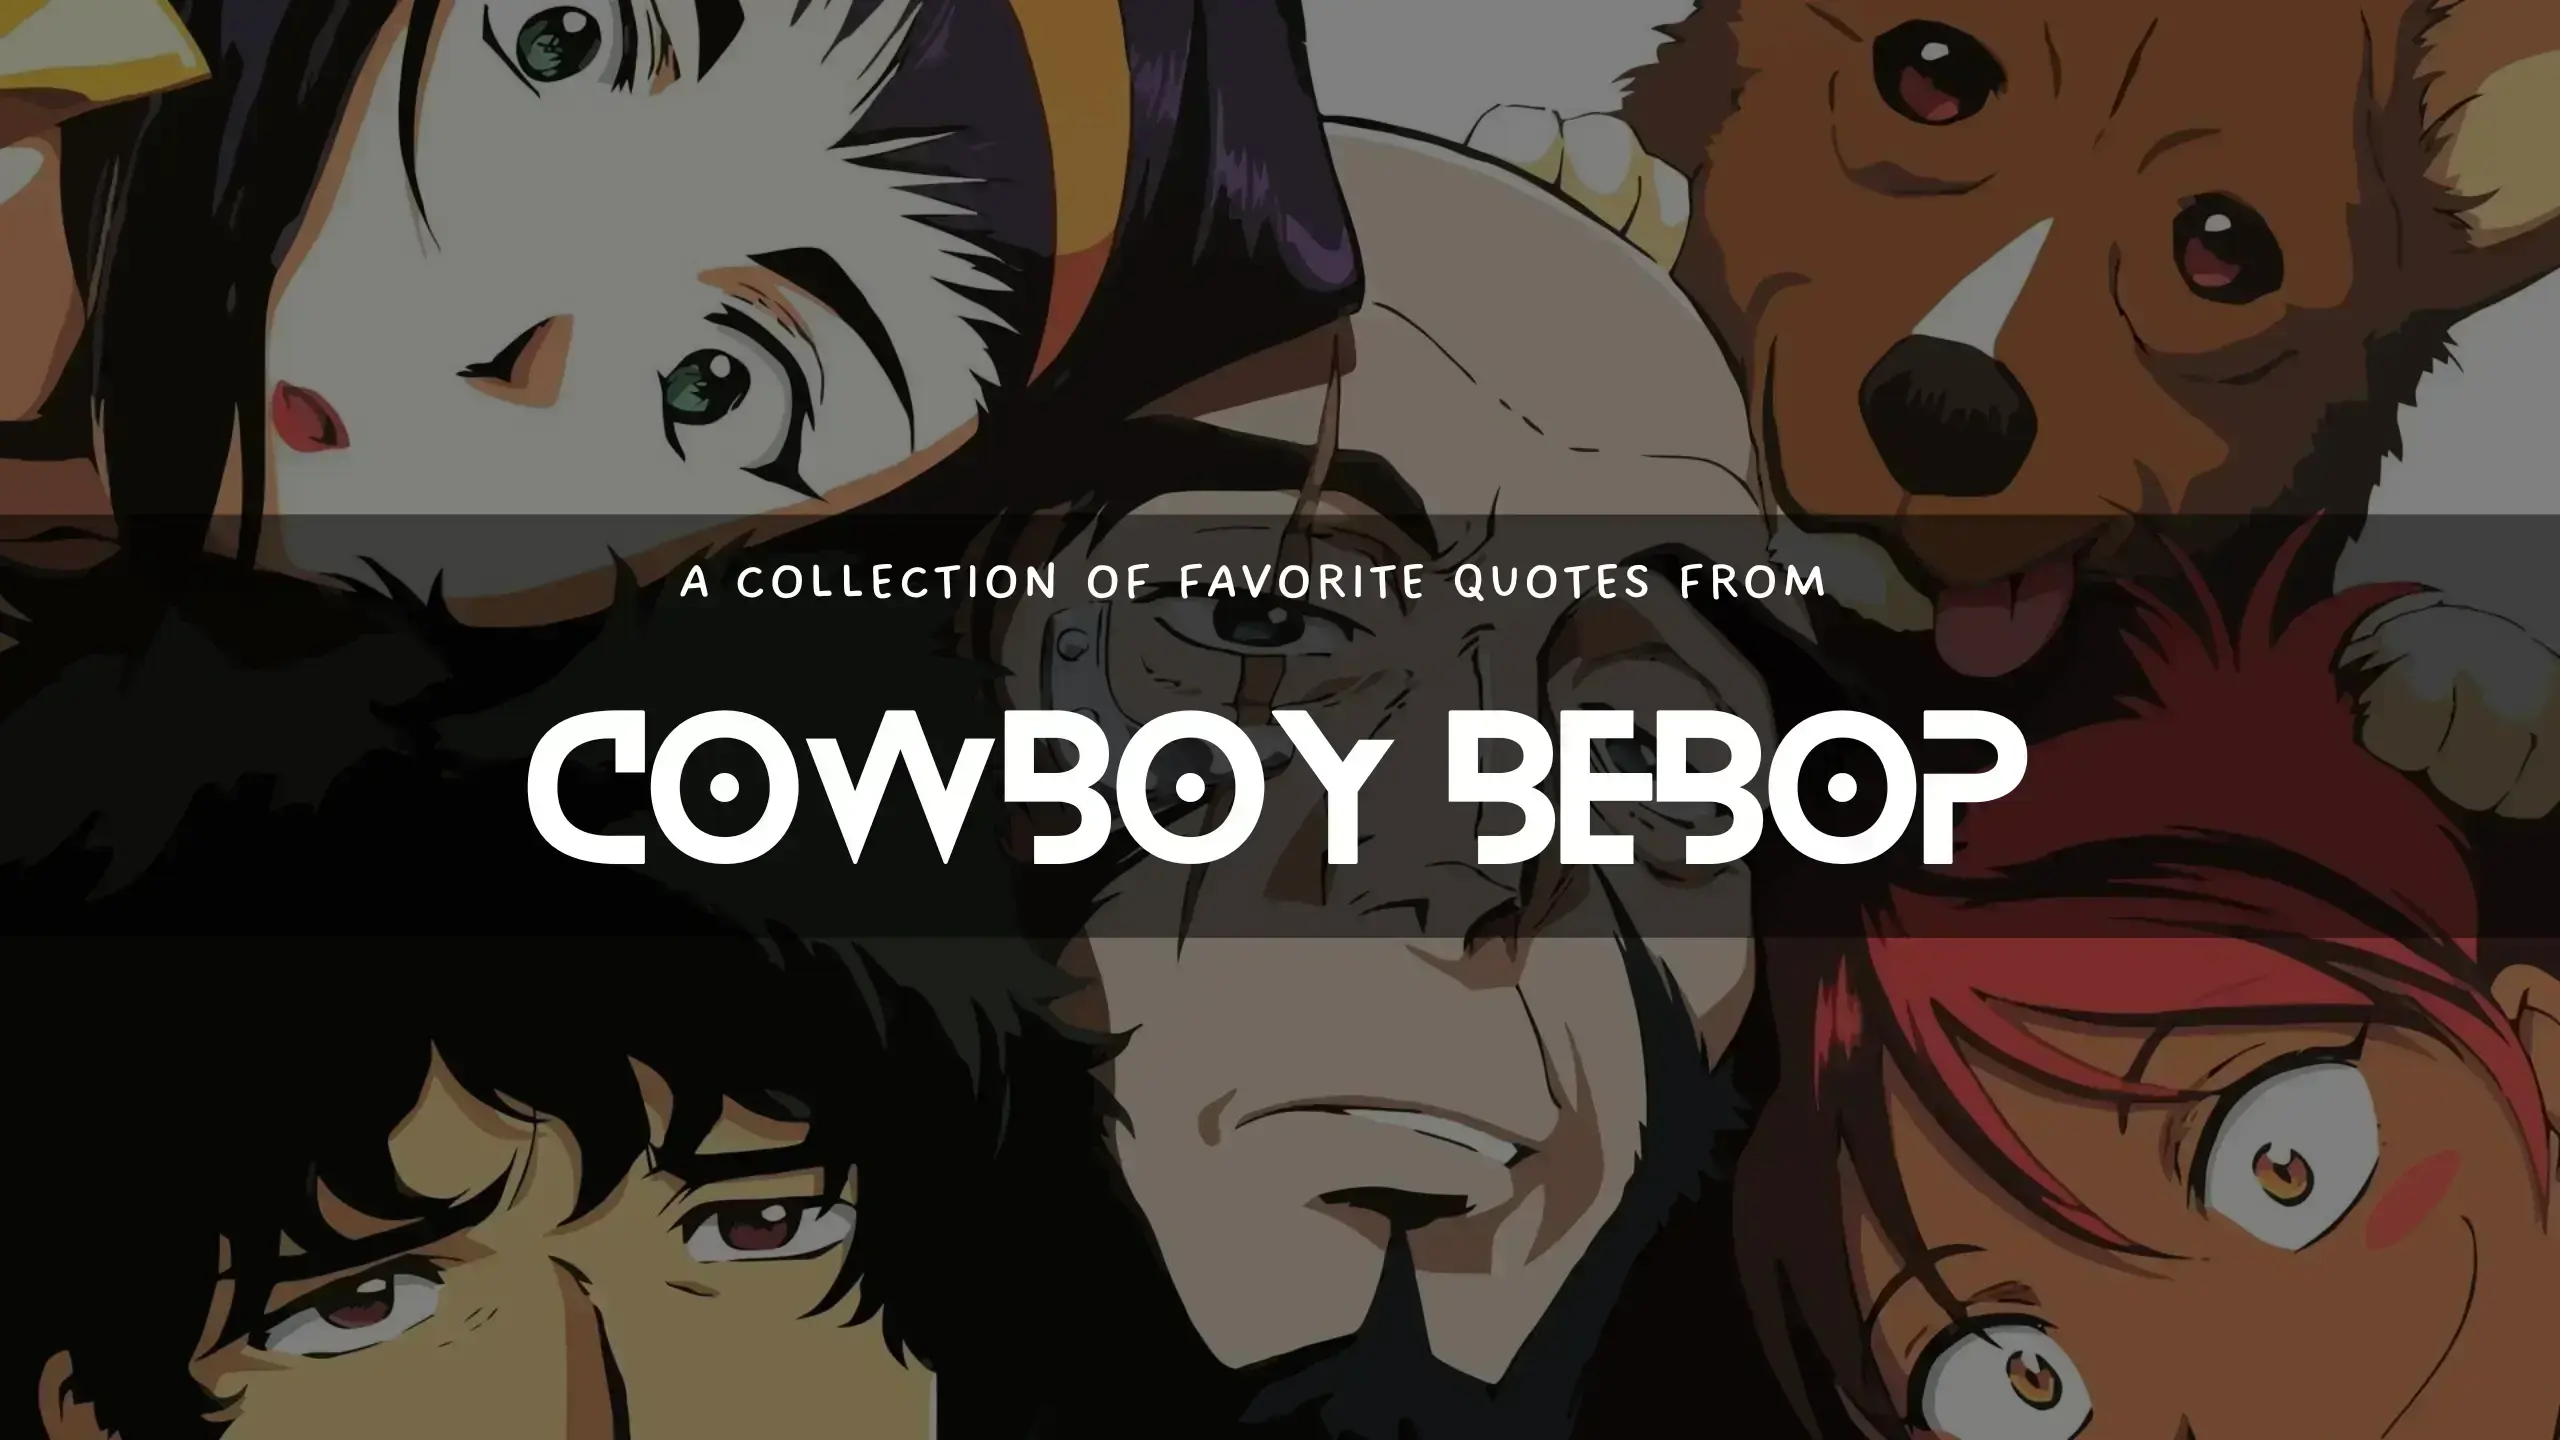 Awesome quotes from the Cowboy Bebop Anime